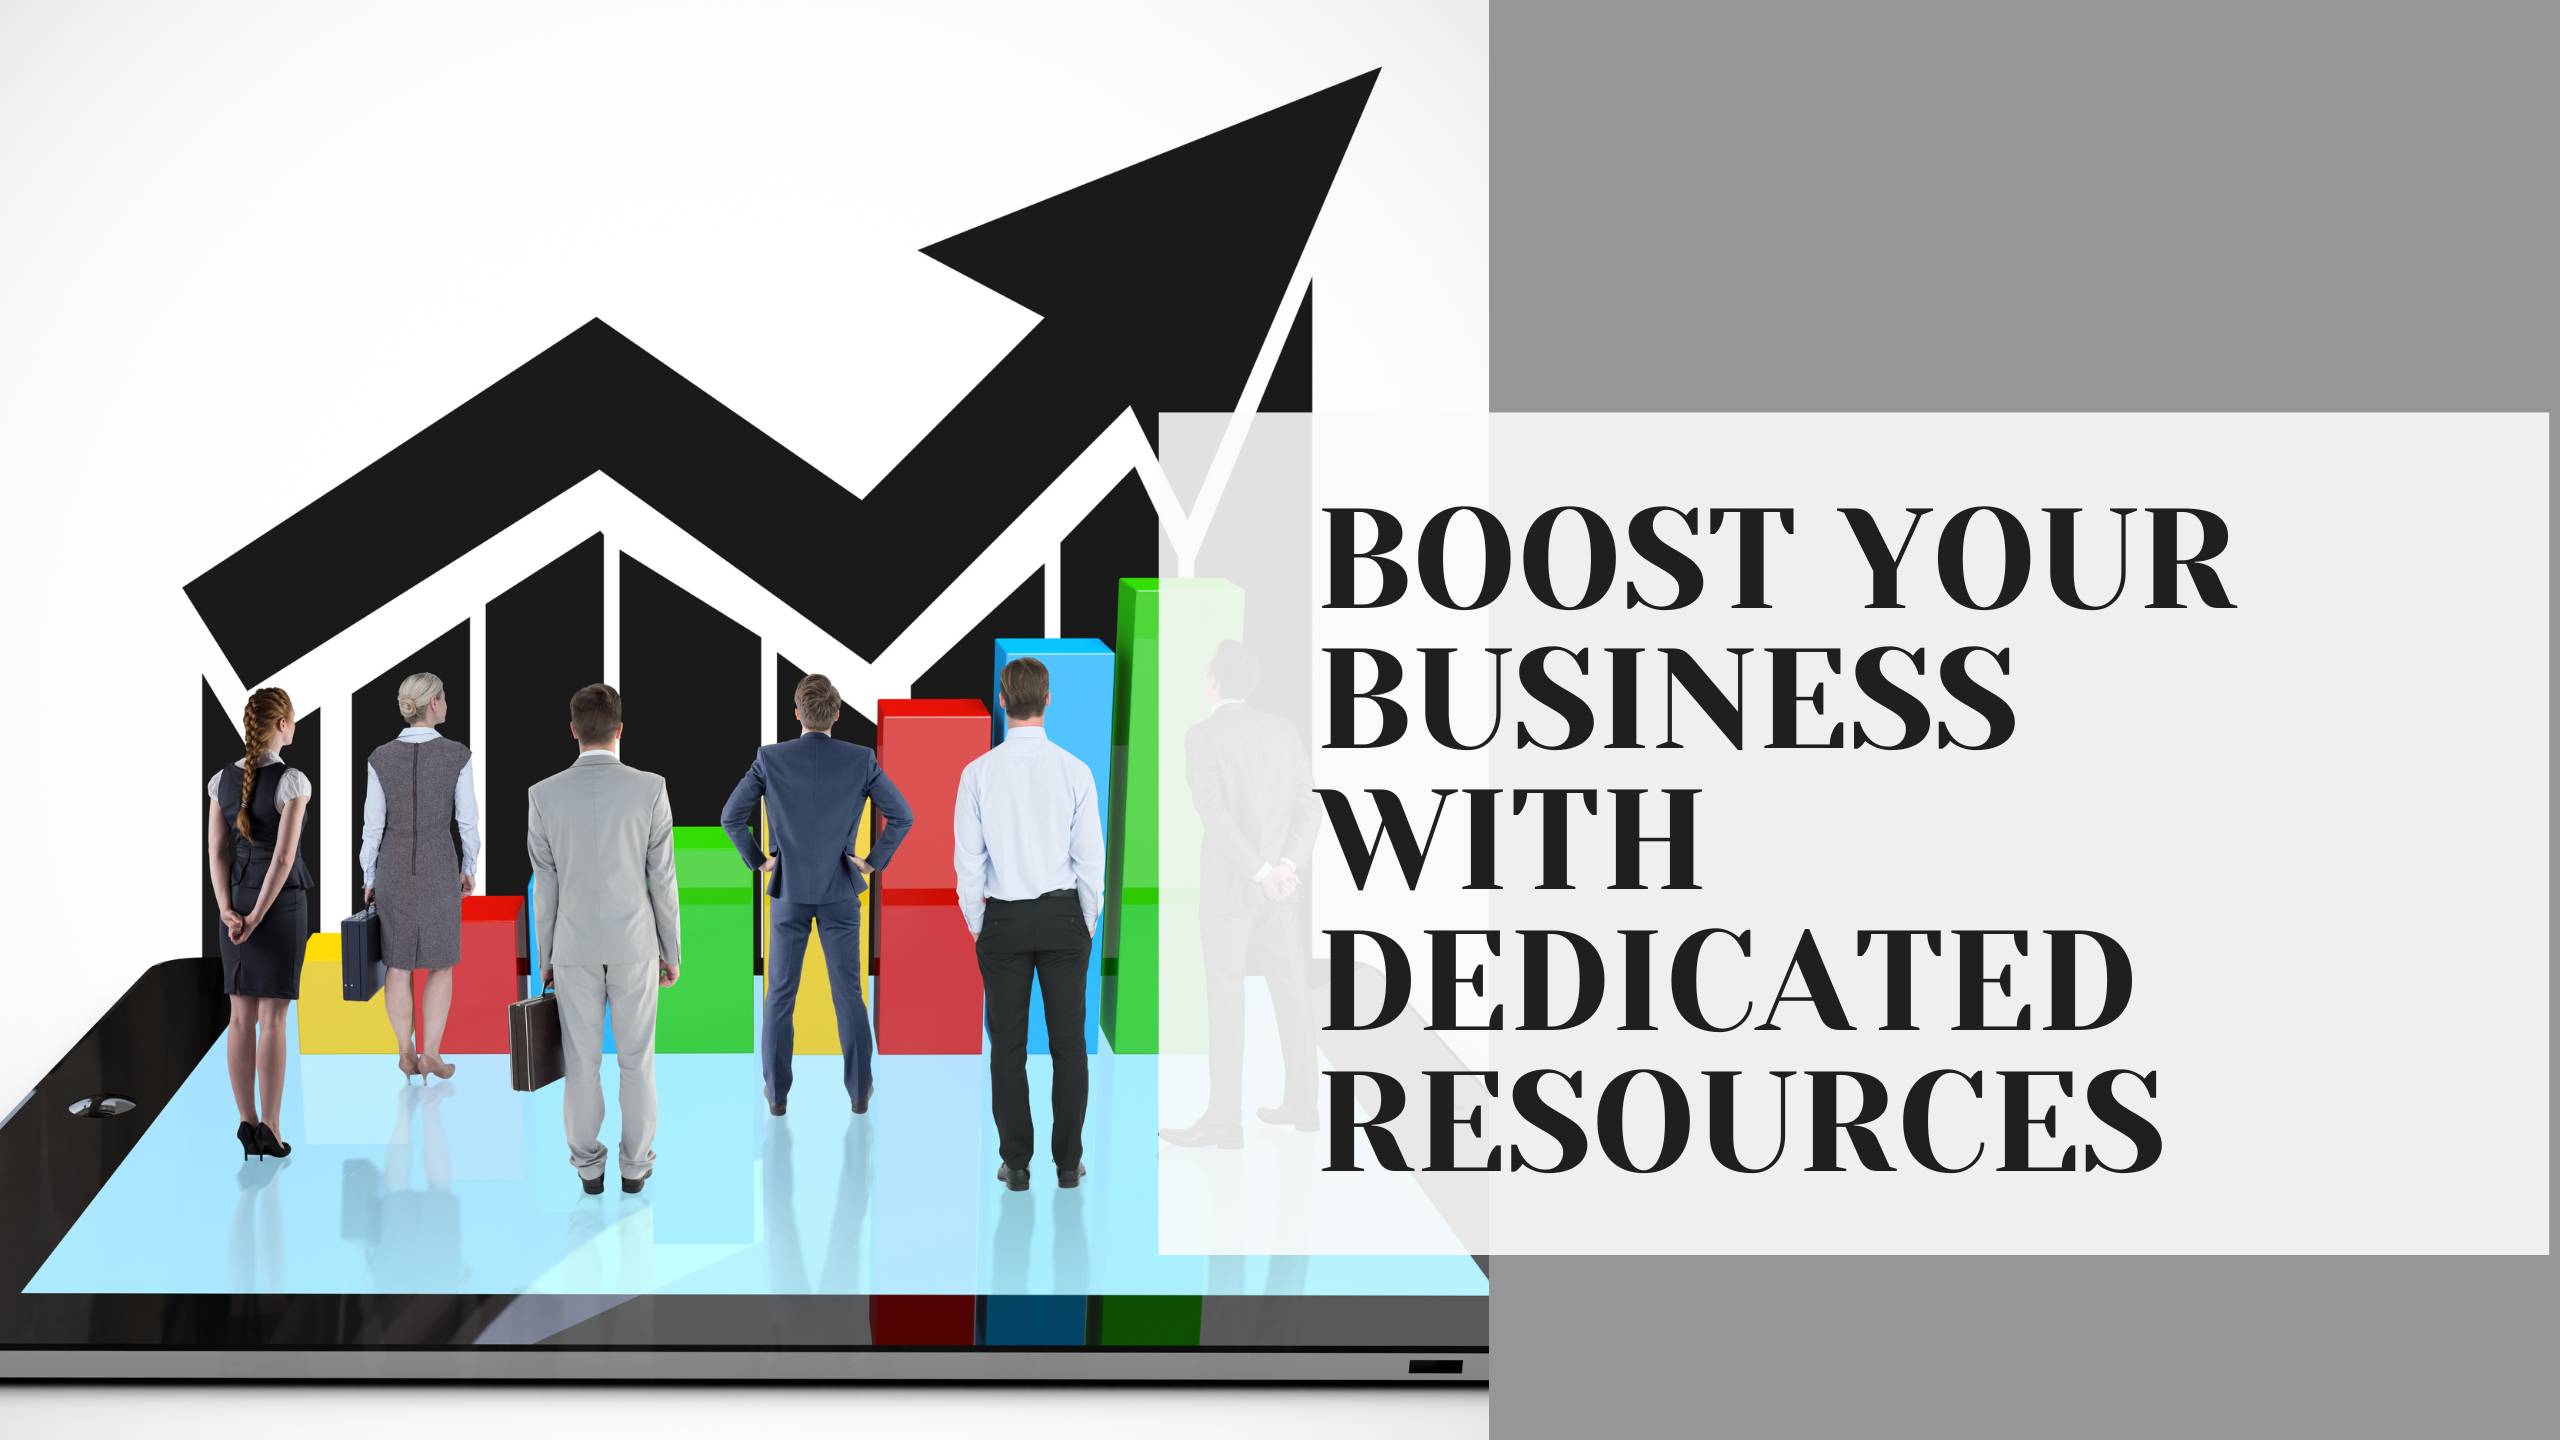 Hire Dedicated Resources